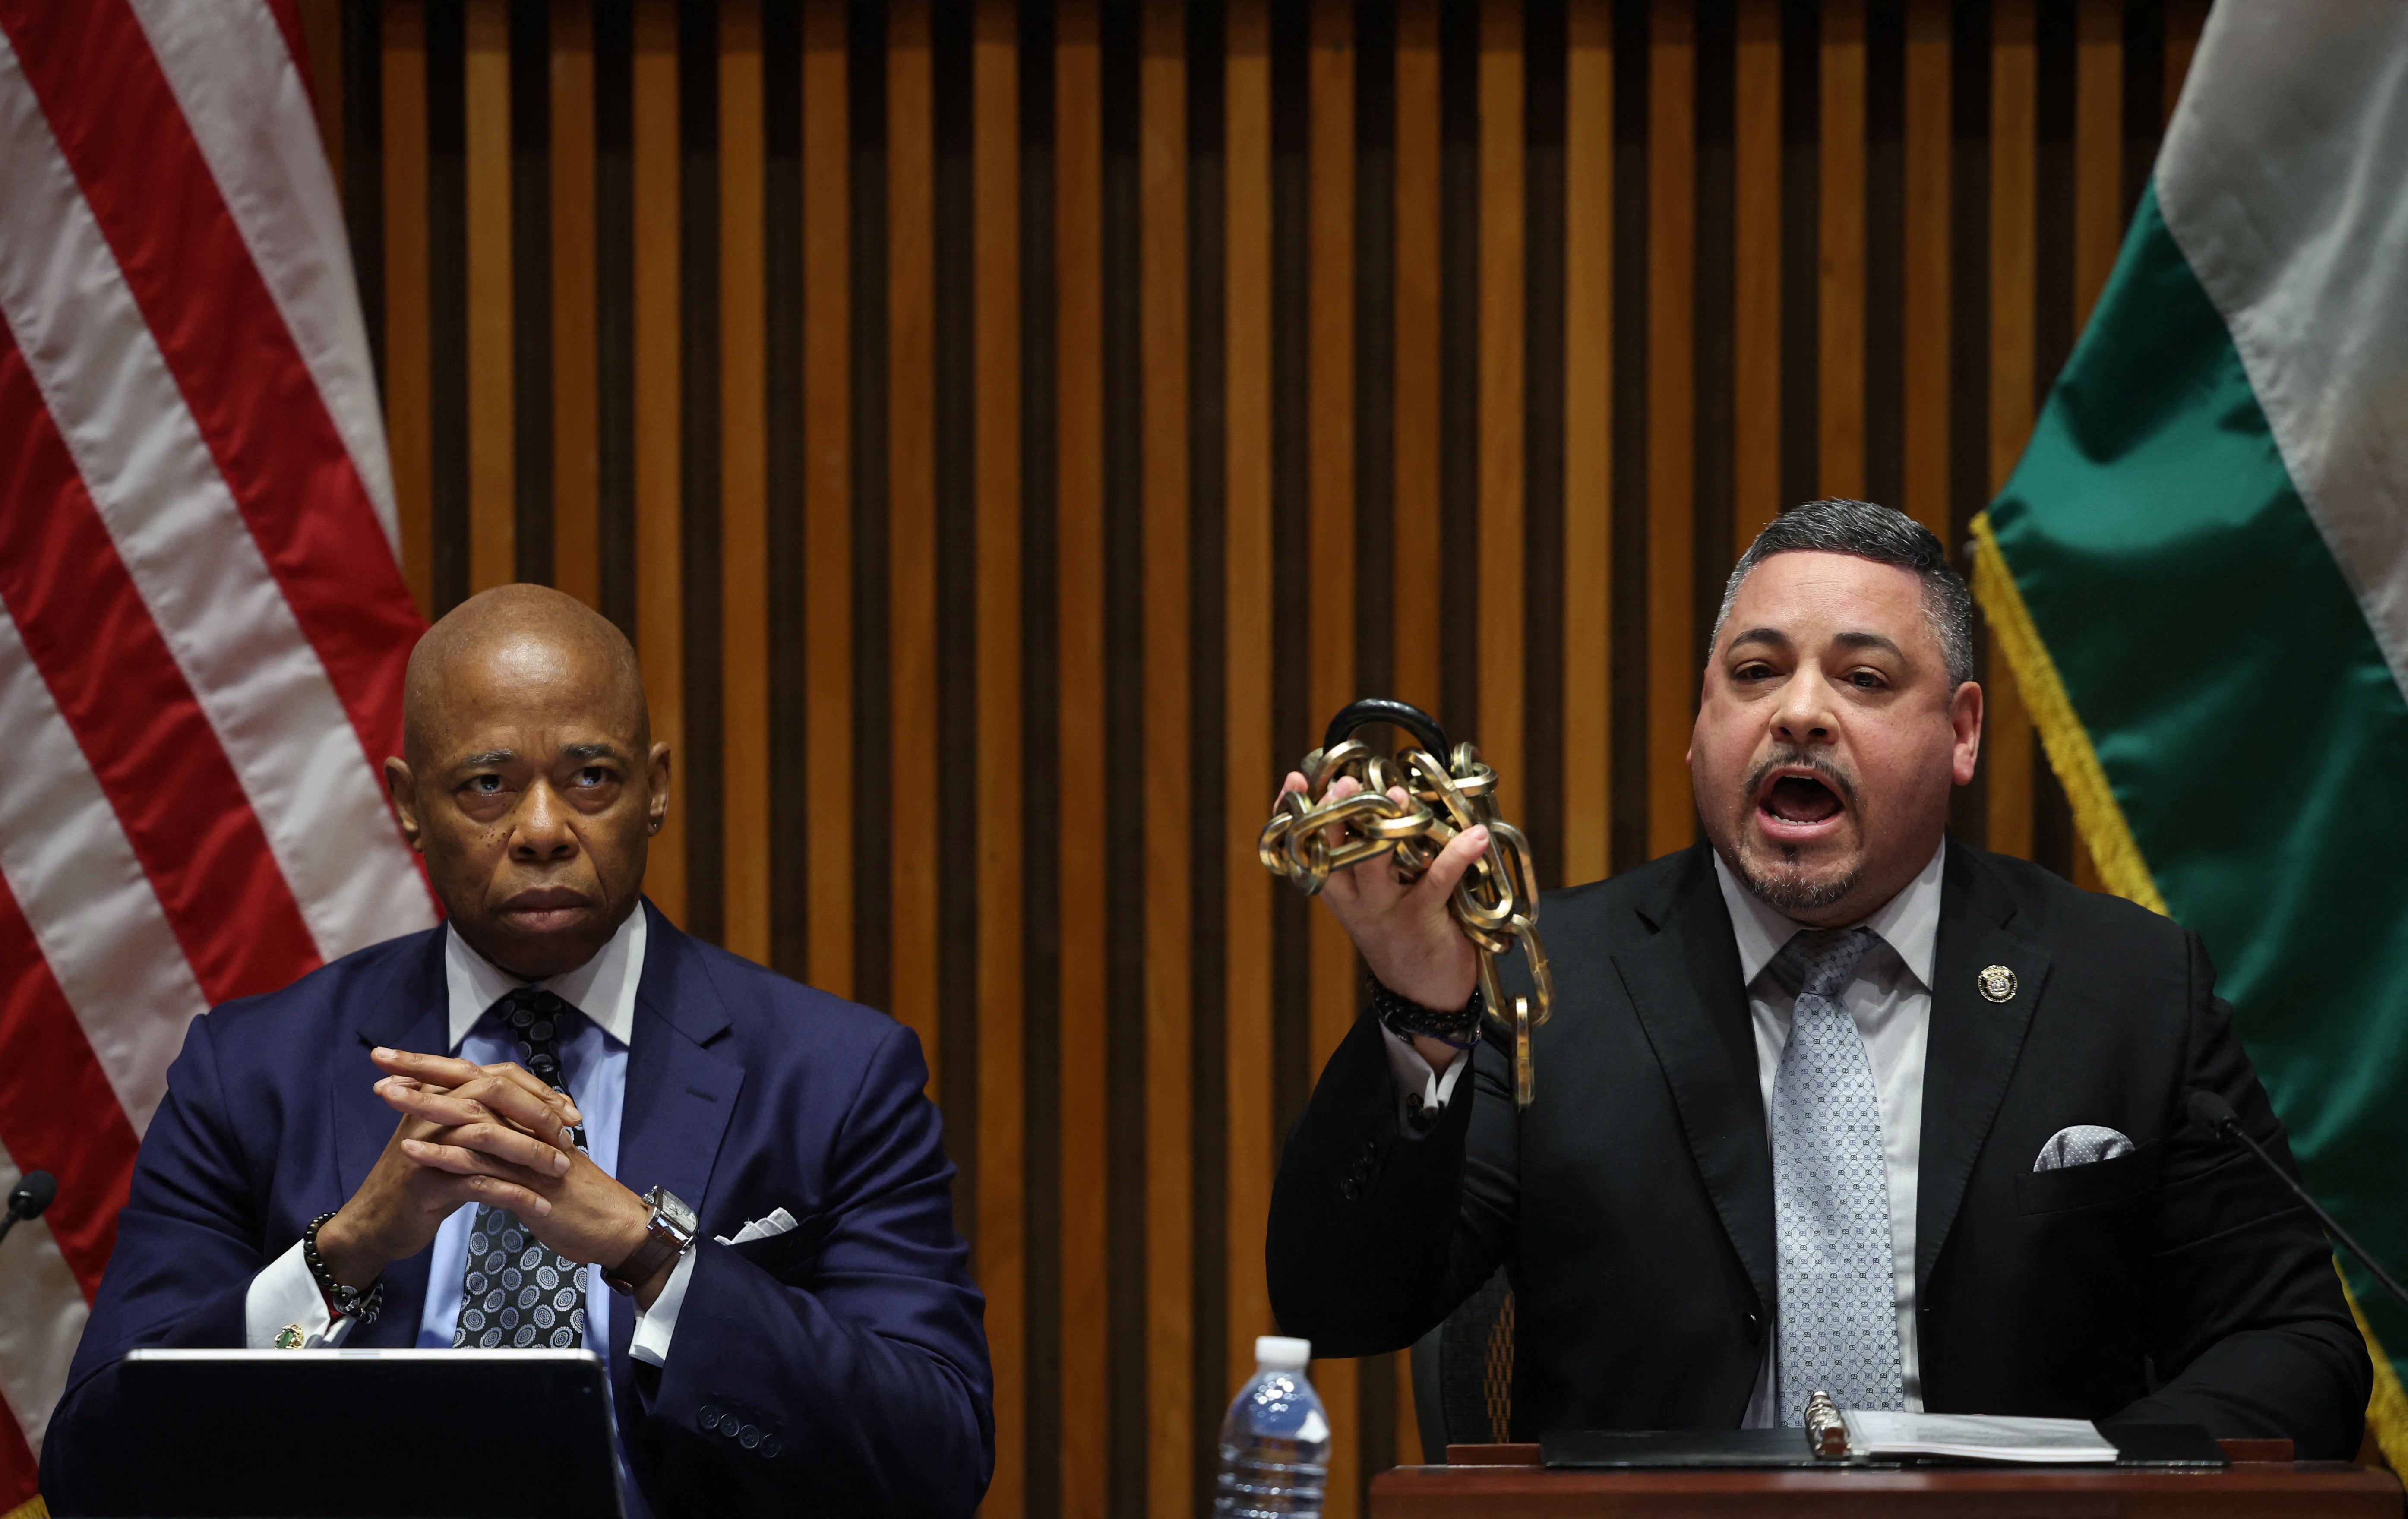 New York City Mayor Eric Adams (left) and New York City Police Department Edward Caban (right) spoke to reporters on Wednesday. Mr Caban, who is holding a bike lock and chain that protesters reportedly used to barricade Hamilton Hall, said more than 100 people were arrested at Columbia University on Tuesday